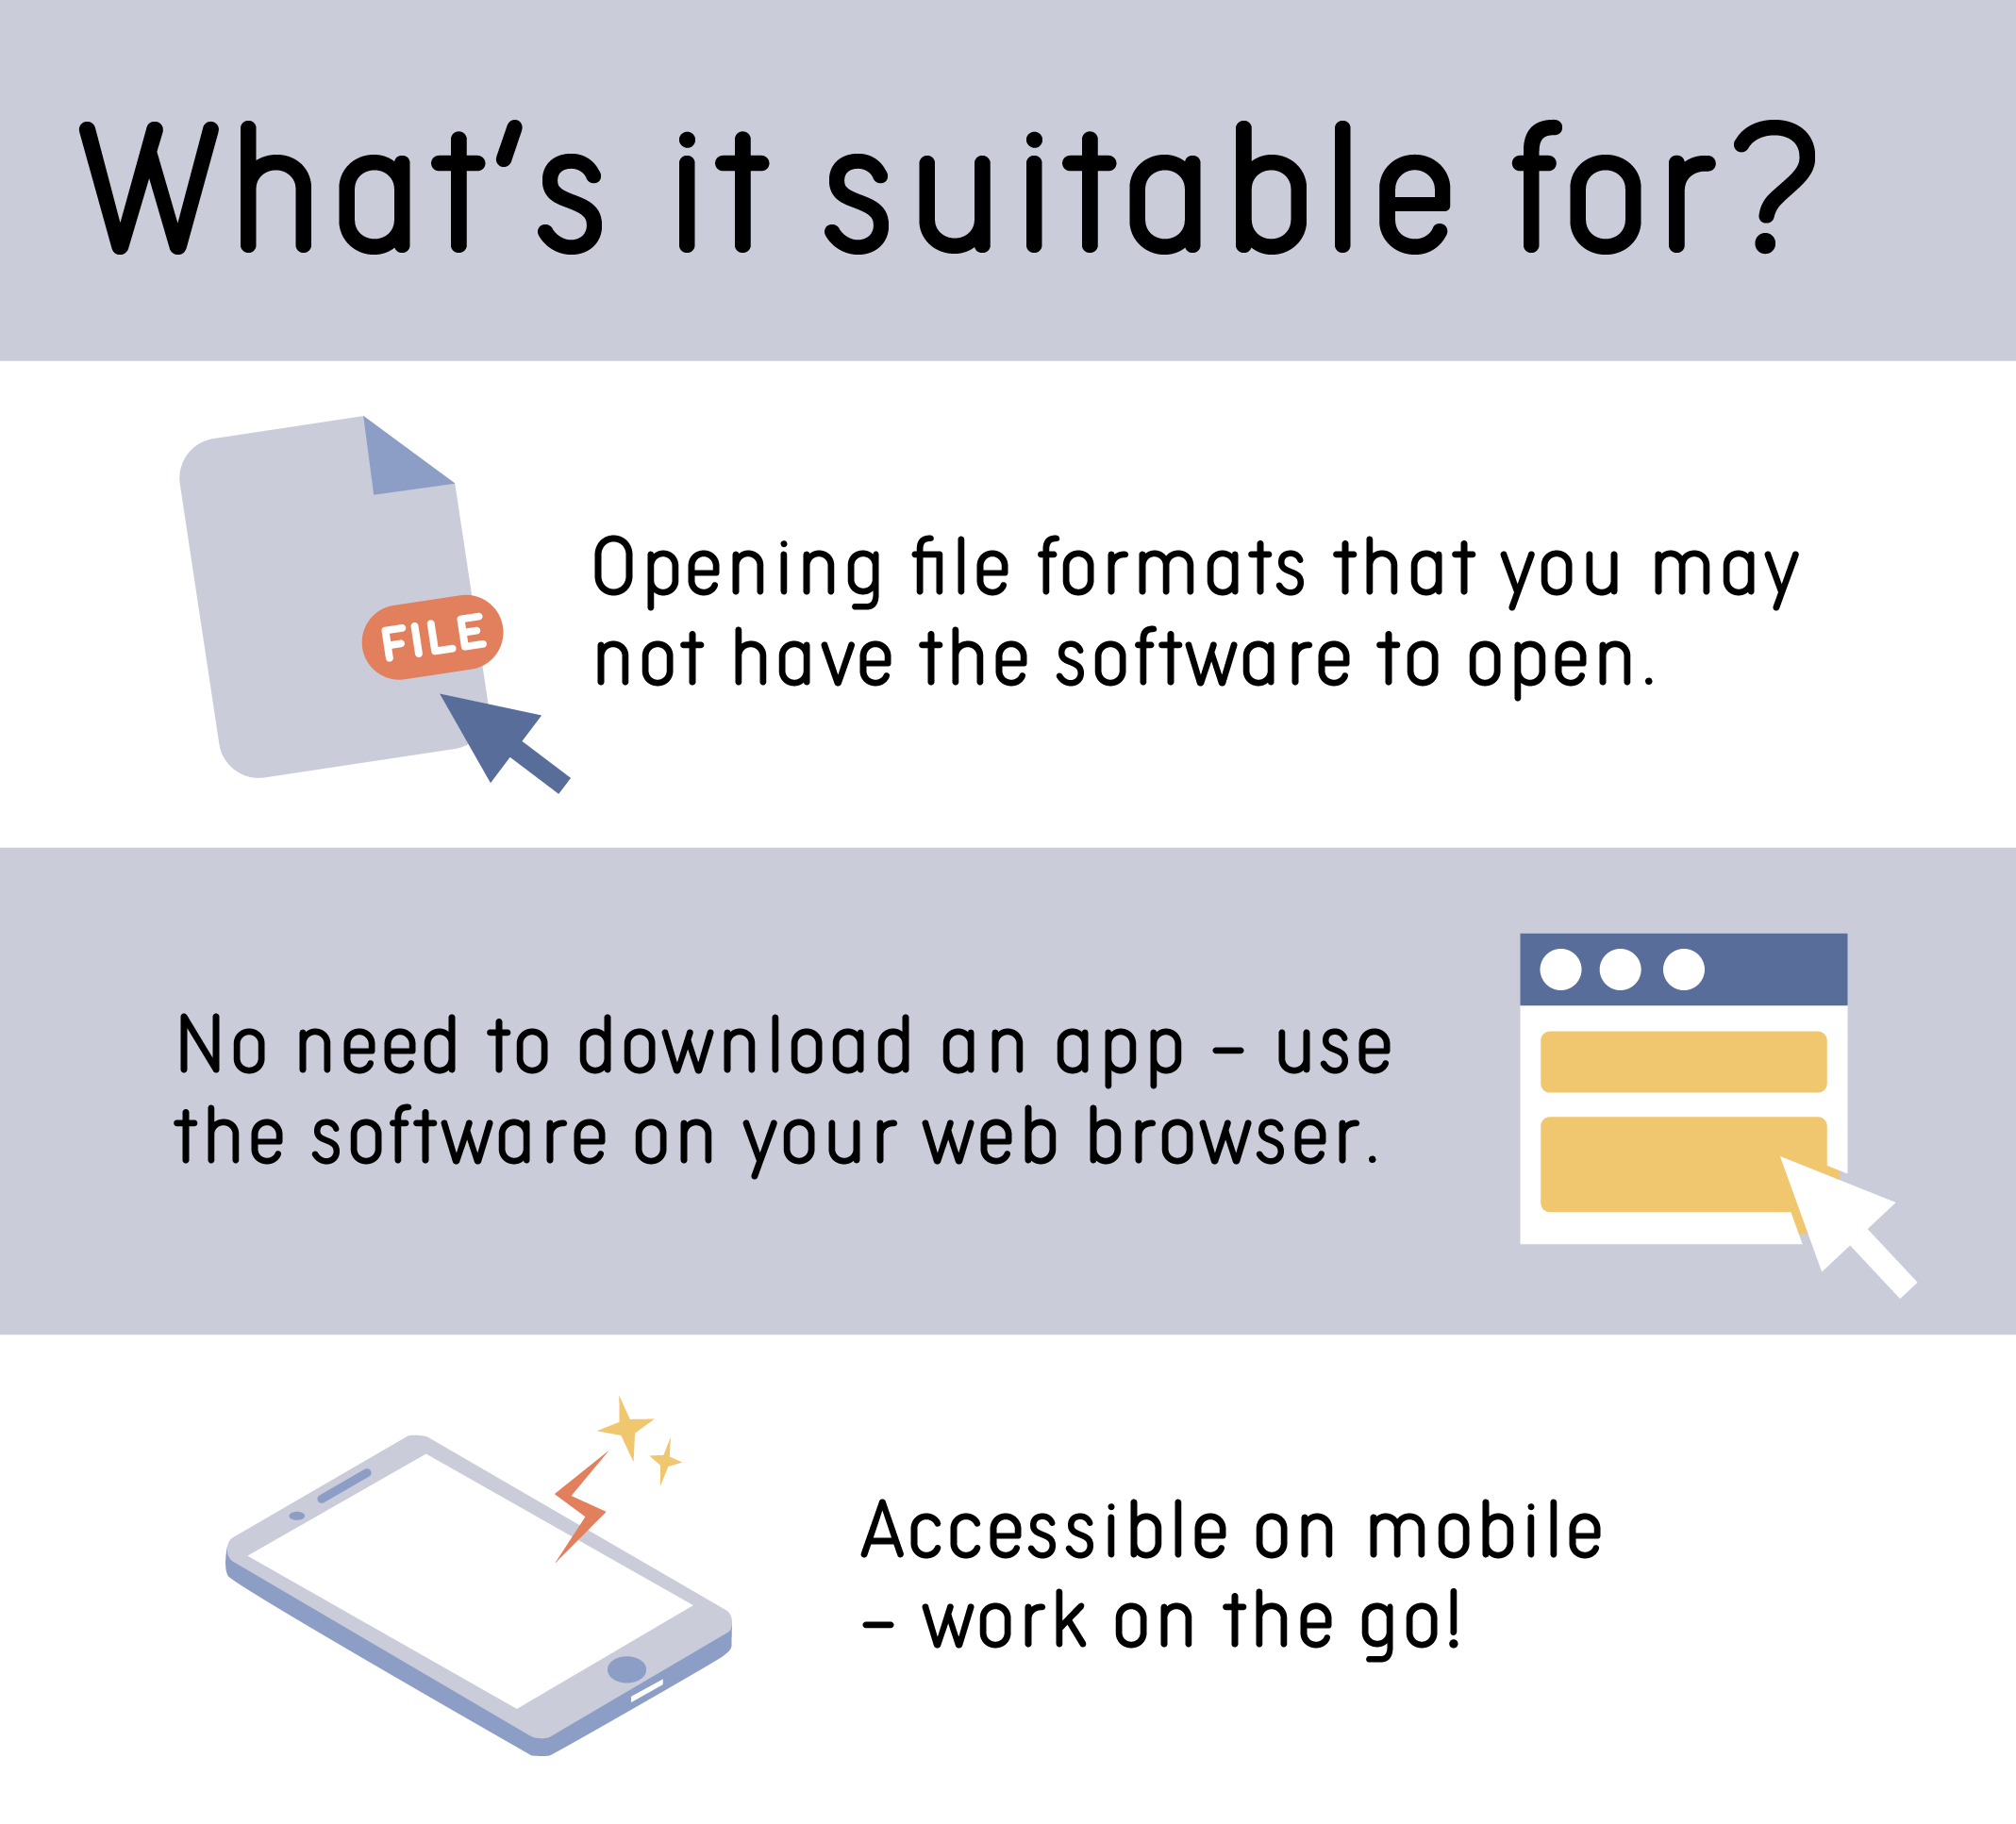 Opening file formats that you may not have the software to open. Web-based application that you can use on your web browser. Accessible on mobile – work on the go!